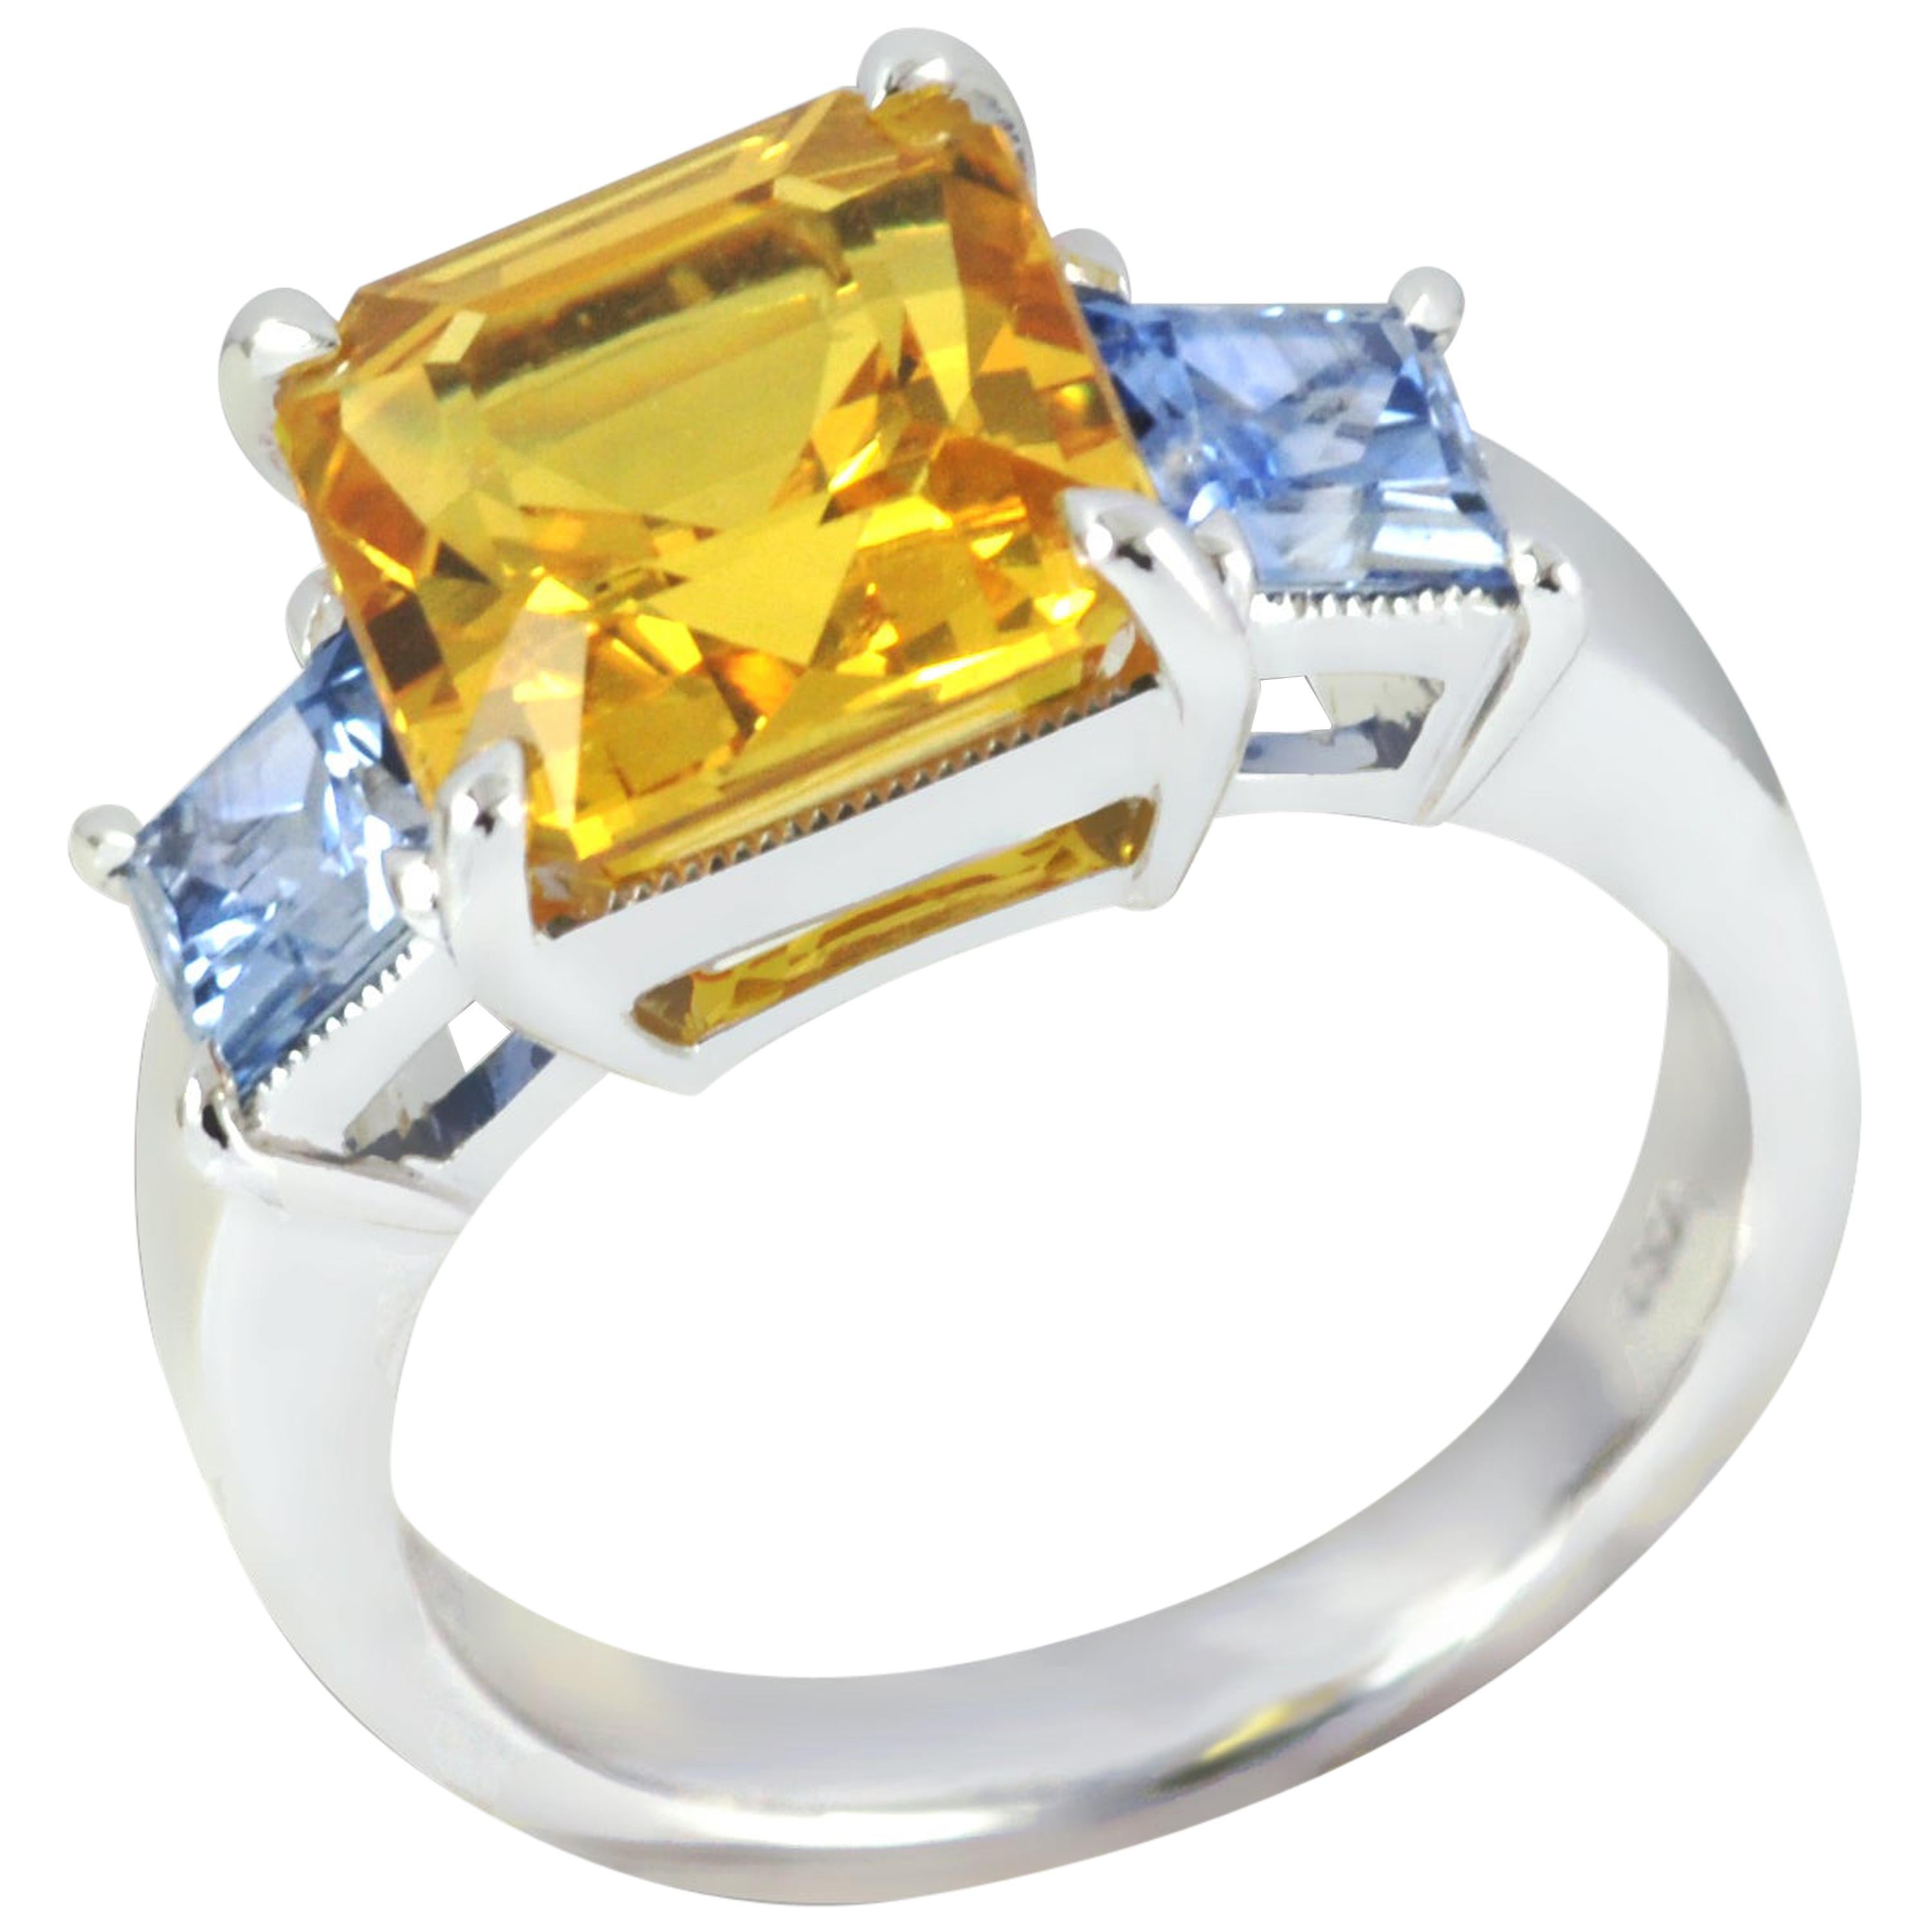 Yellow Sapphire with Blue Sapphire Ring Set in 18 Karat White Gold Settings